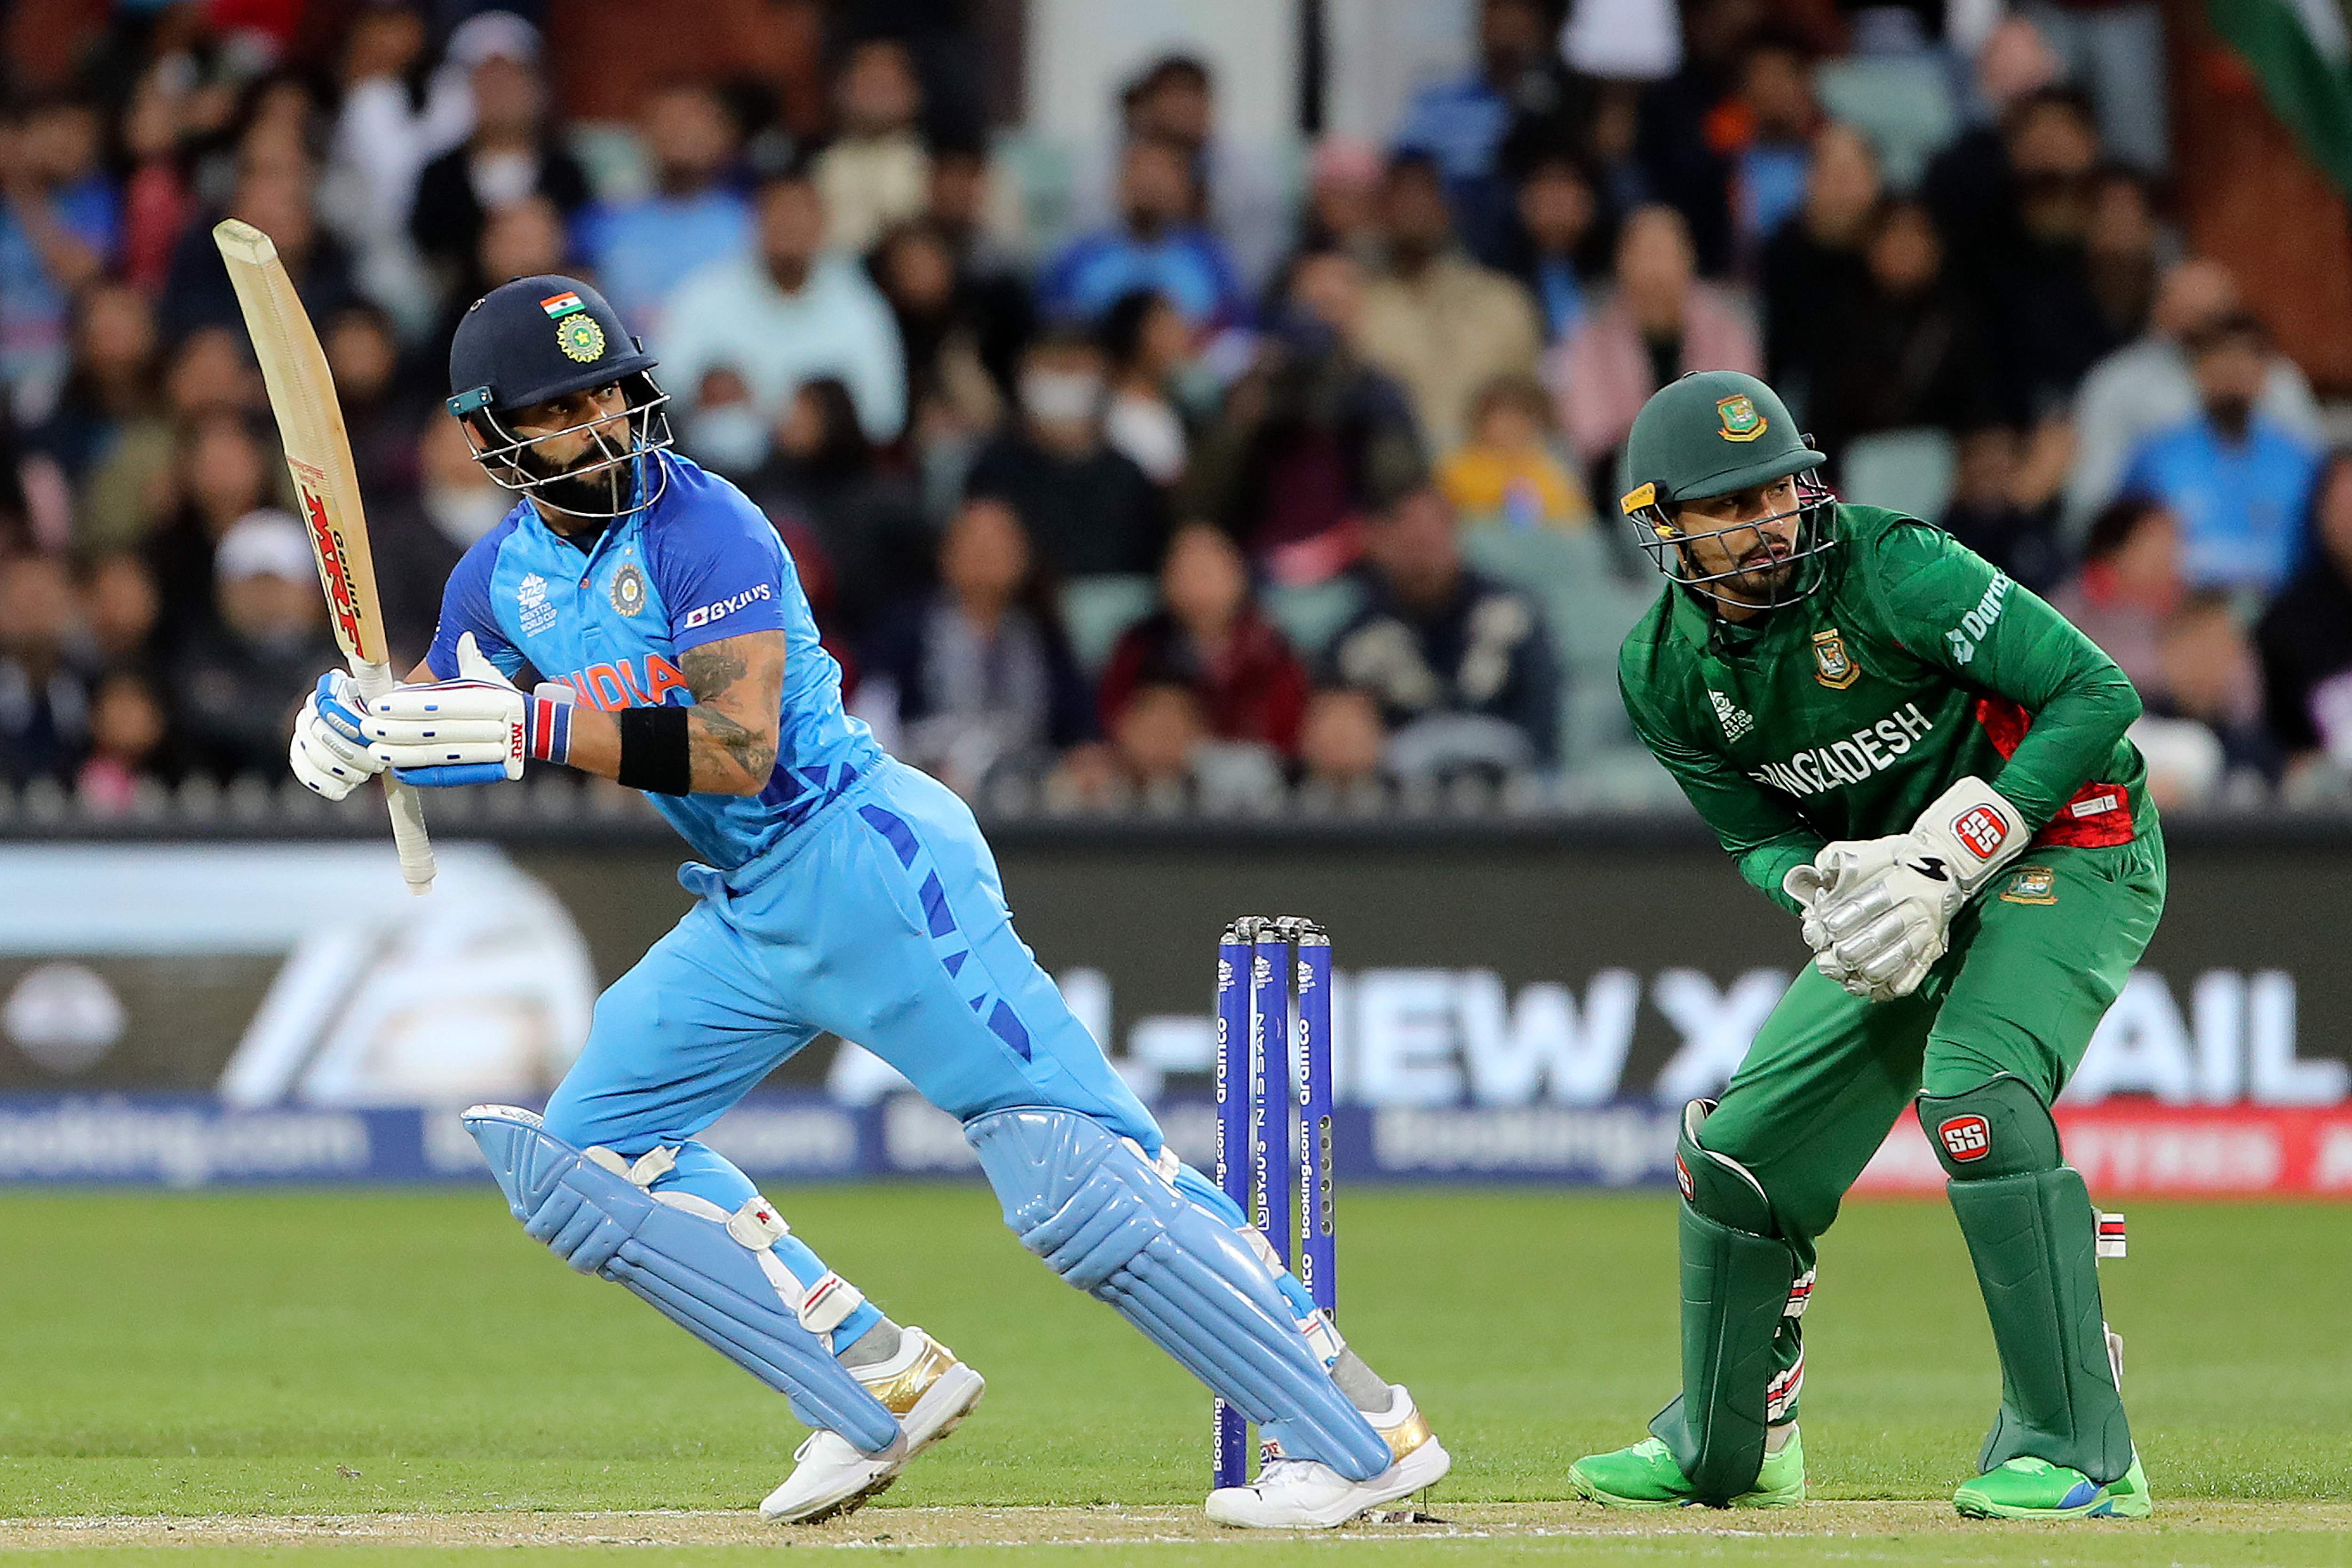 Star Indian batter Virat Kohli is one to watch out during the tournament.